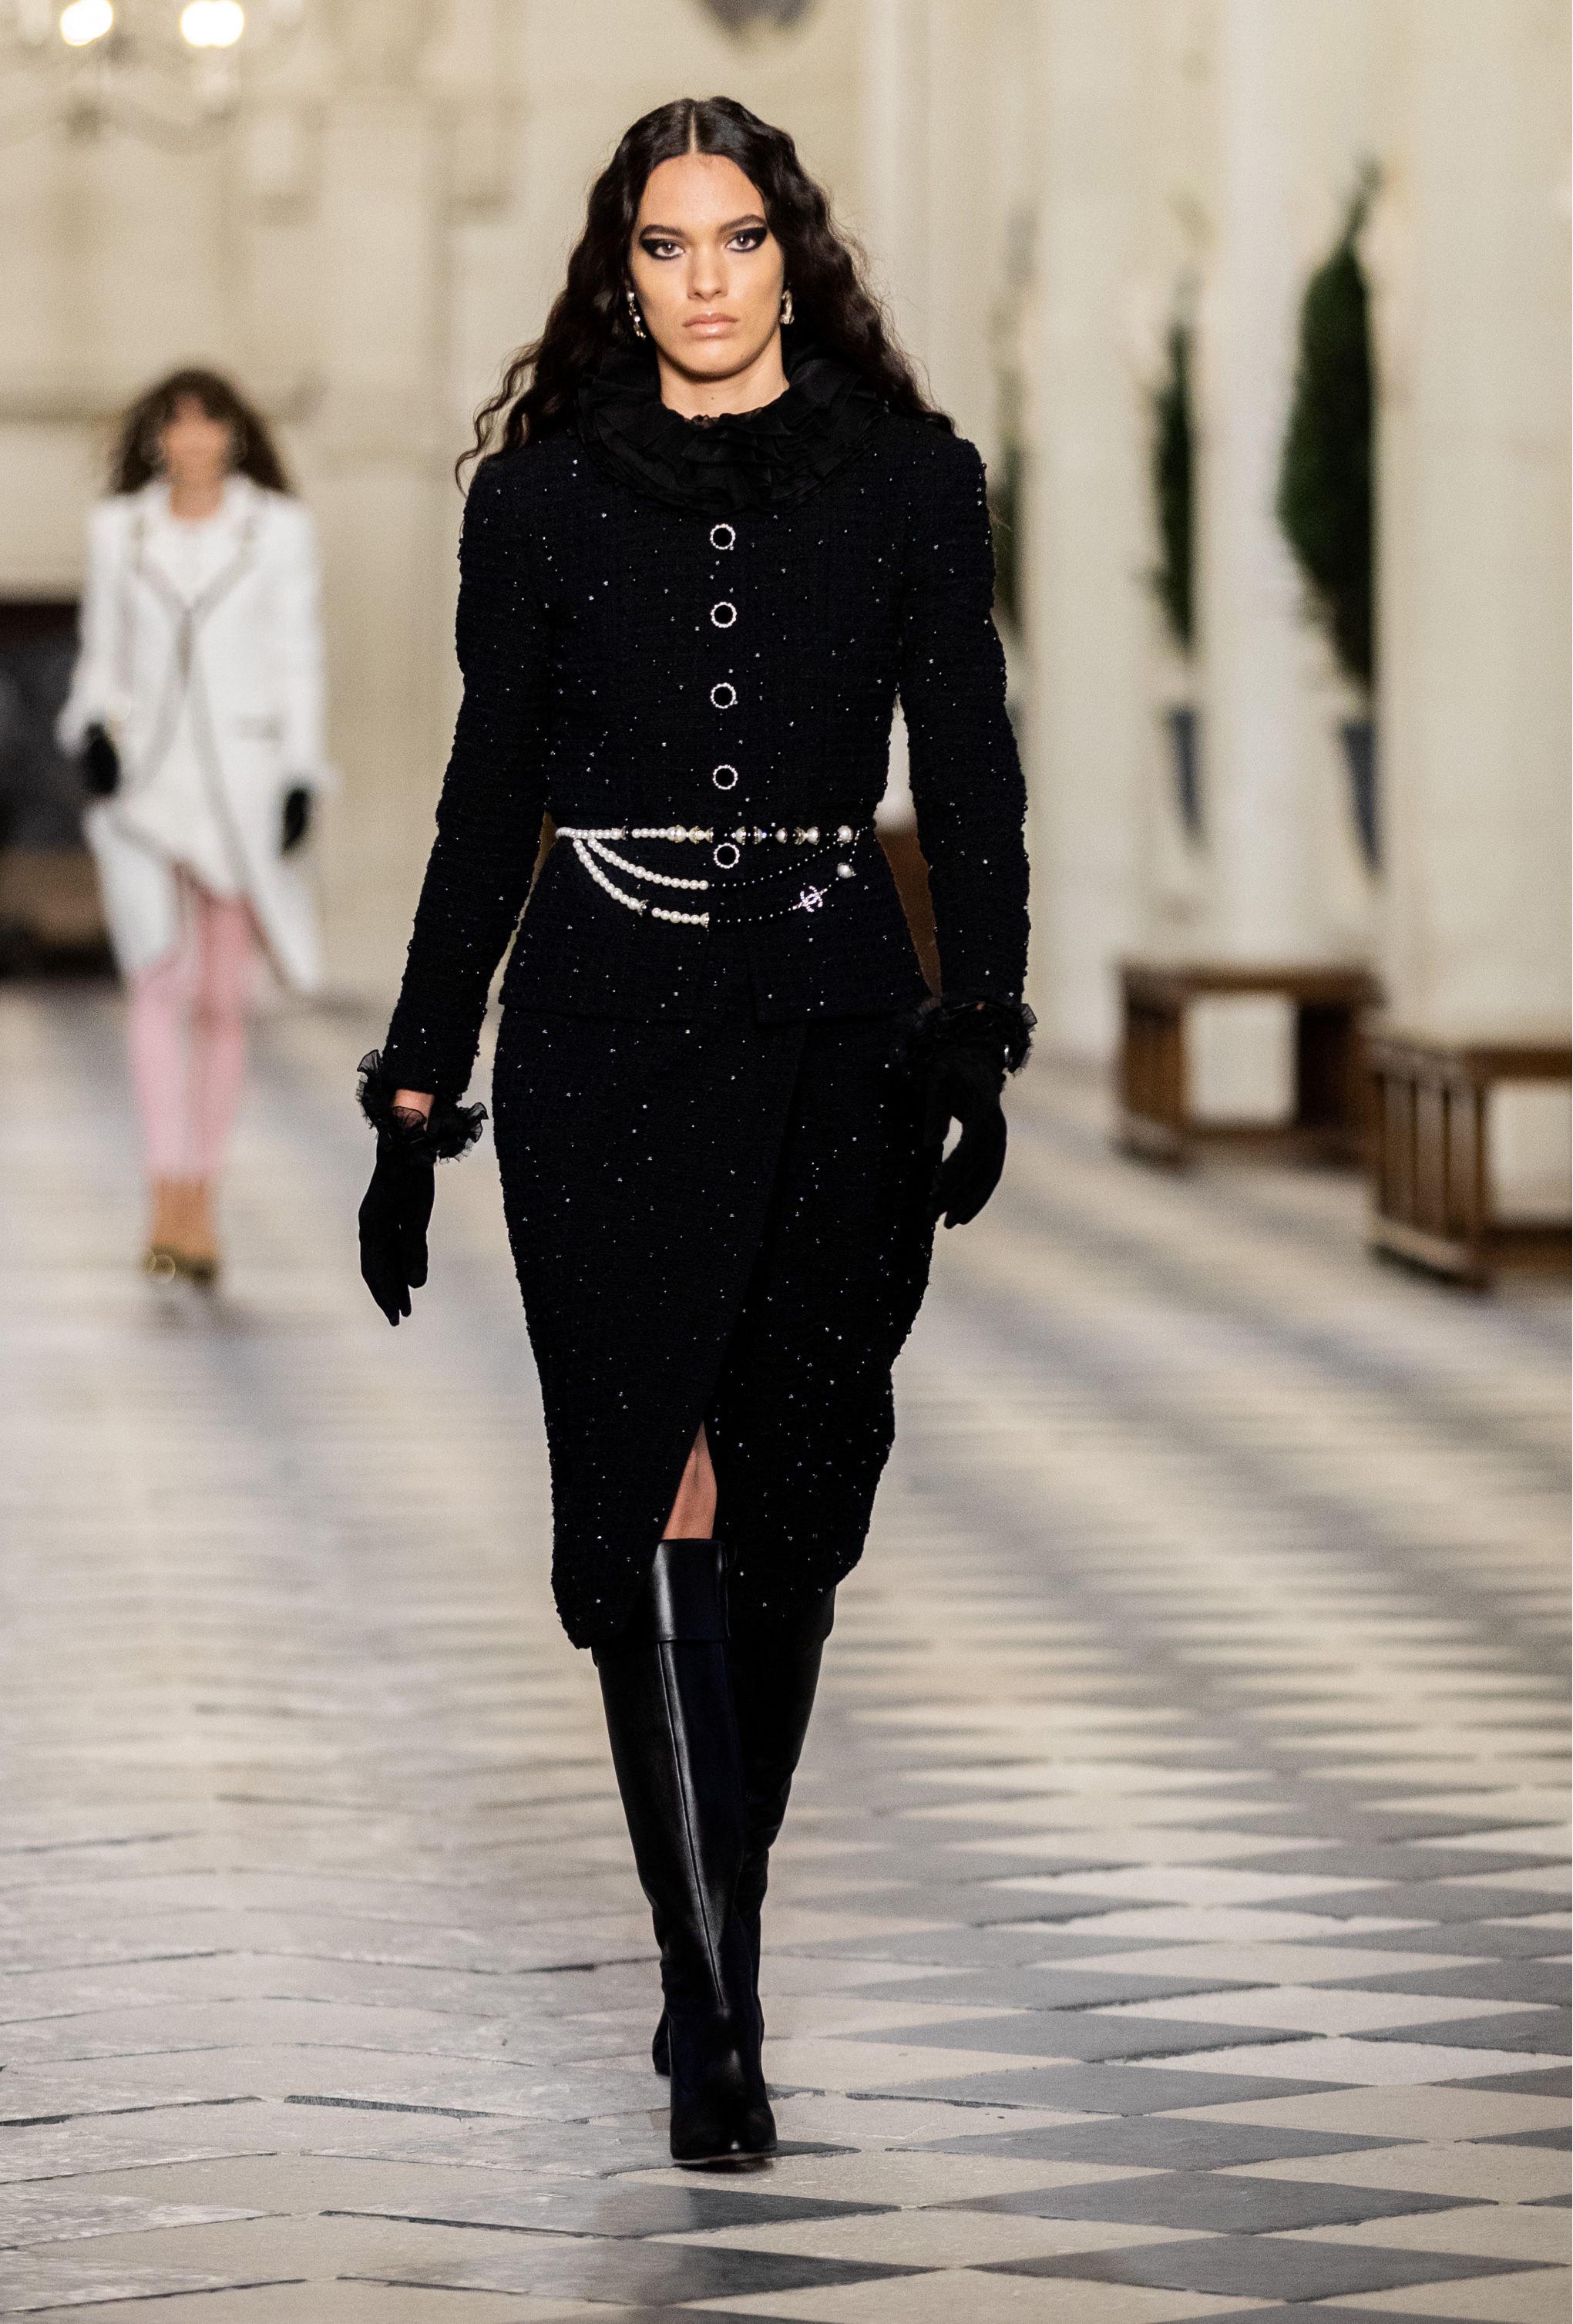 2021 Fashion Trends: 5 Top Trends from Chanel Pre-Fall 2021 Collection